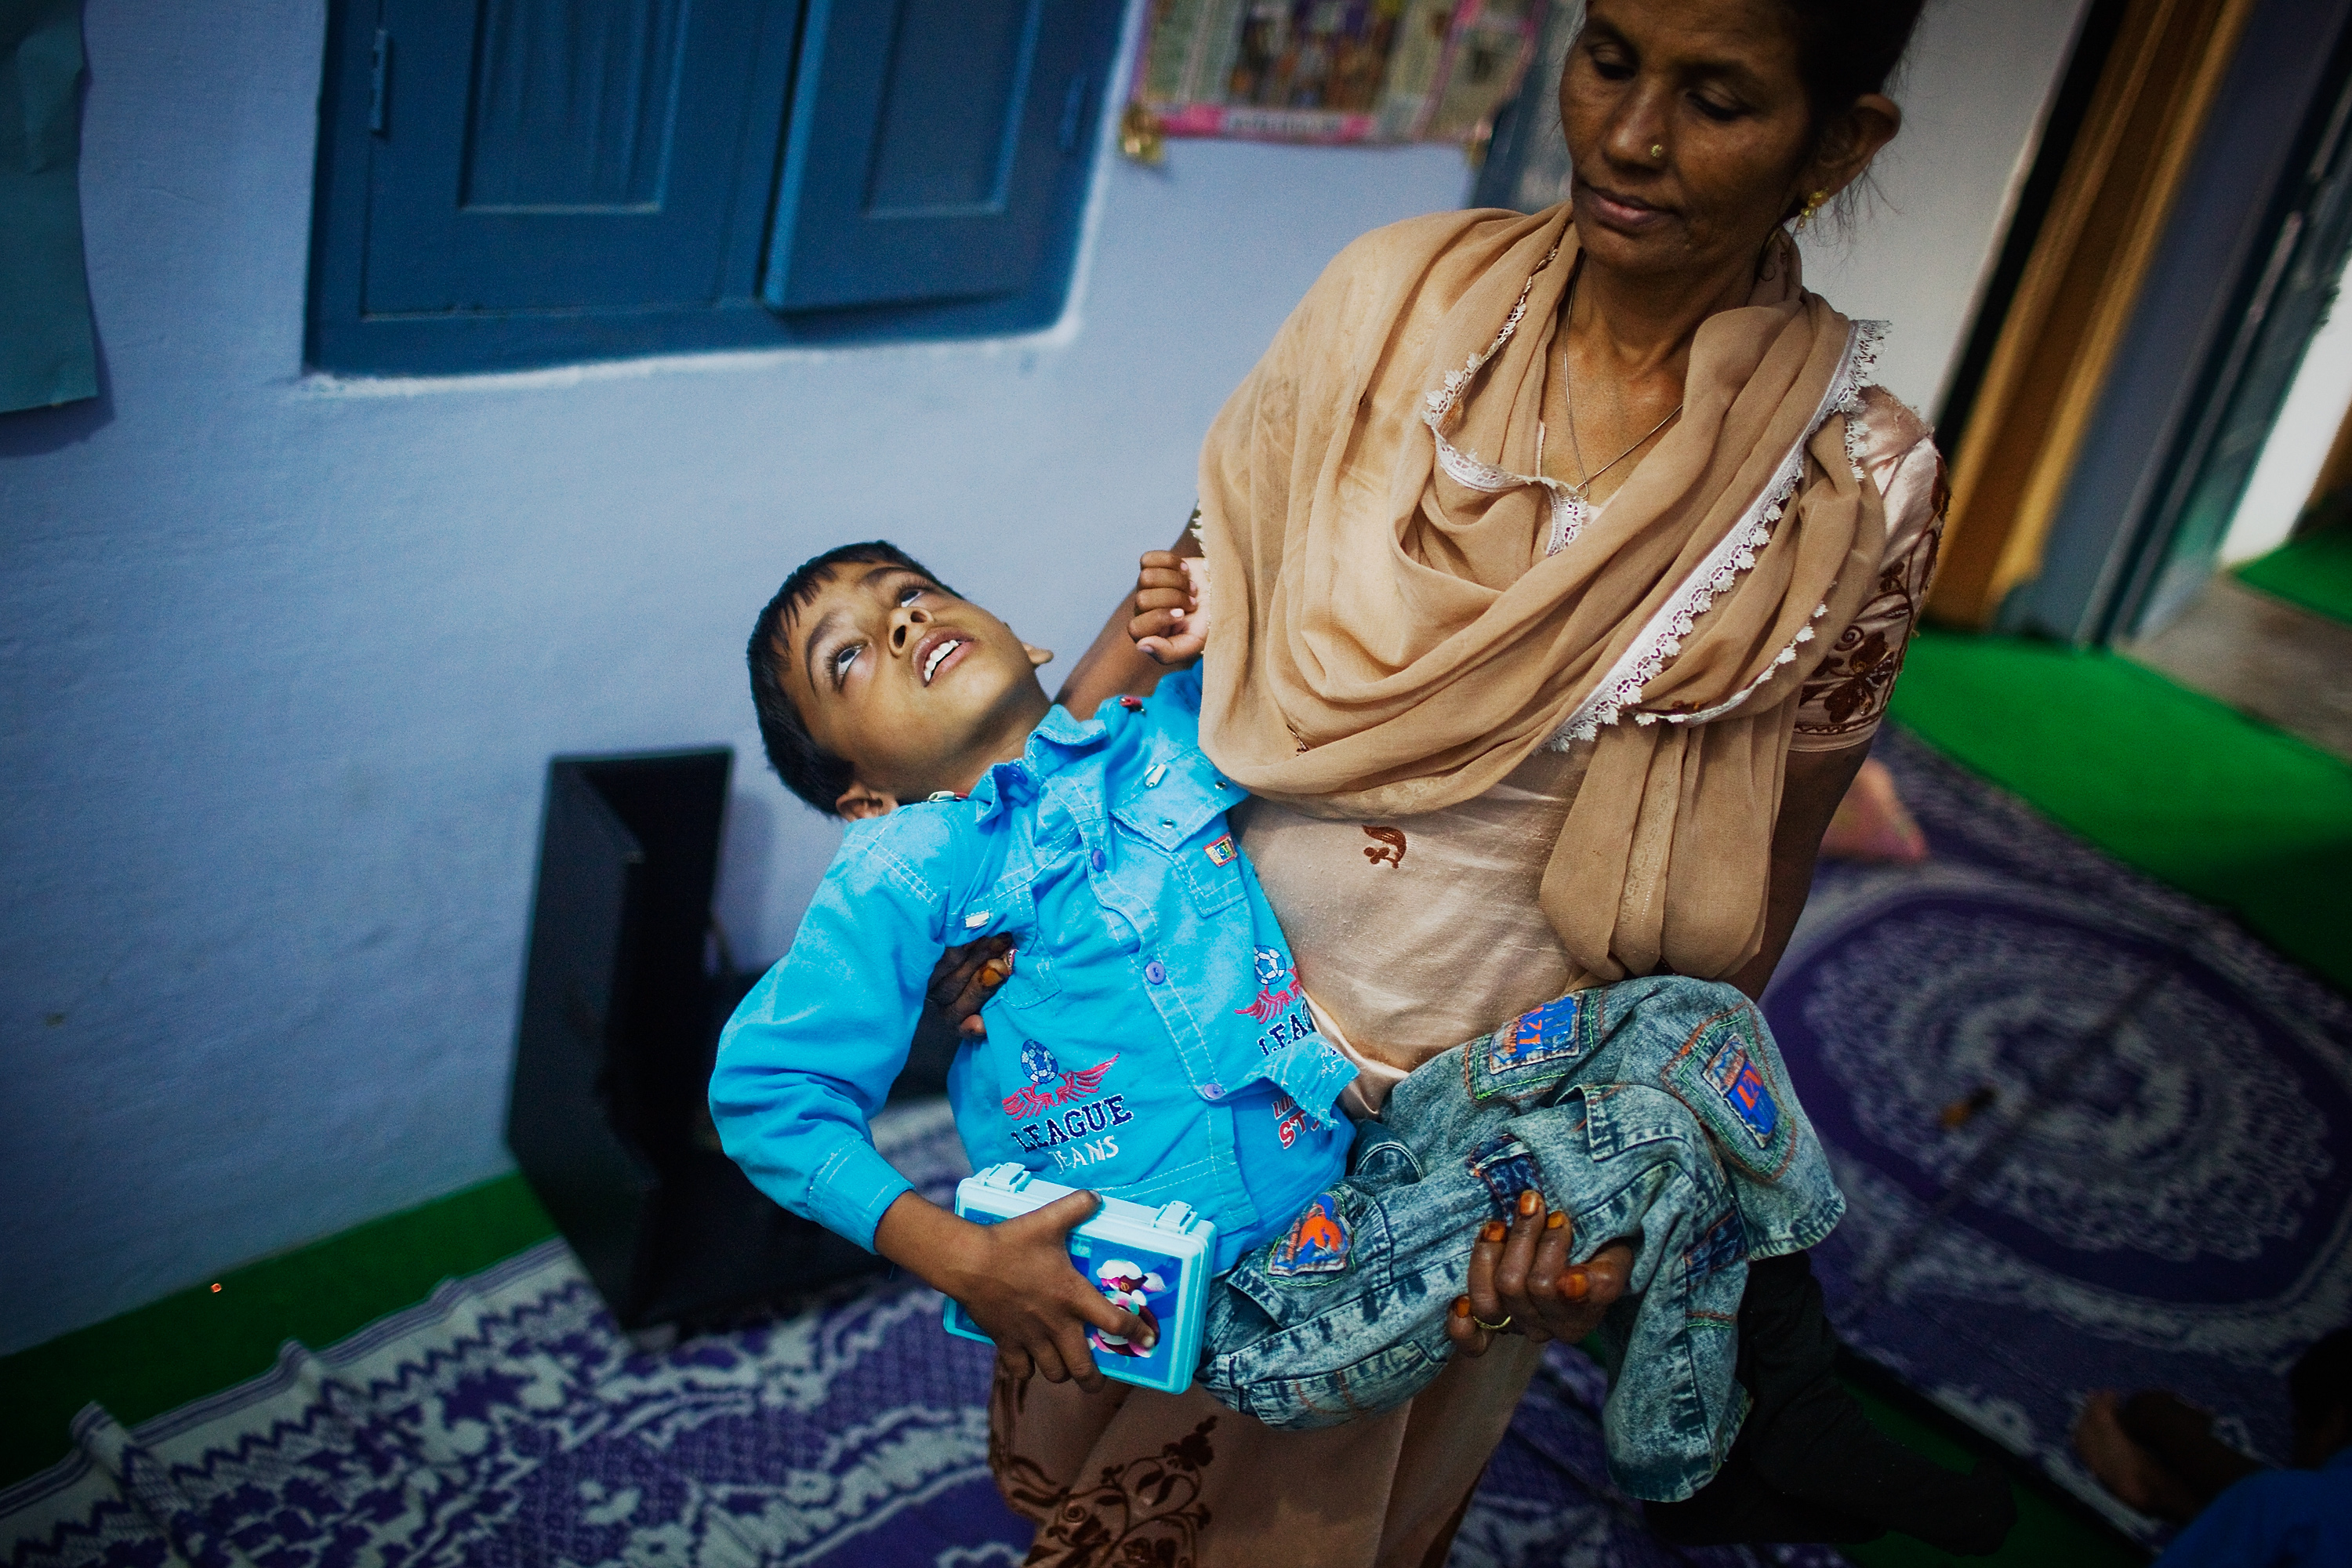 8 year old Annan is carried by Nafiza Bee co-ordinator of the Chingari Trust clinic in Bhopal, India. Twenty-five years after an explosion causing a mass gas leak, in the Union Carbide factory in Bhopal, killed at least eight thousand people. A new generation is growing up sick, disabled and struggling for justice. (Photo by Daniel Berehulak/Getty Images)